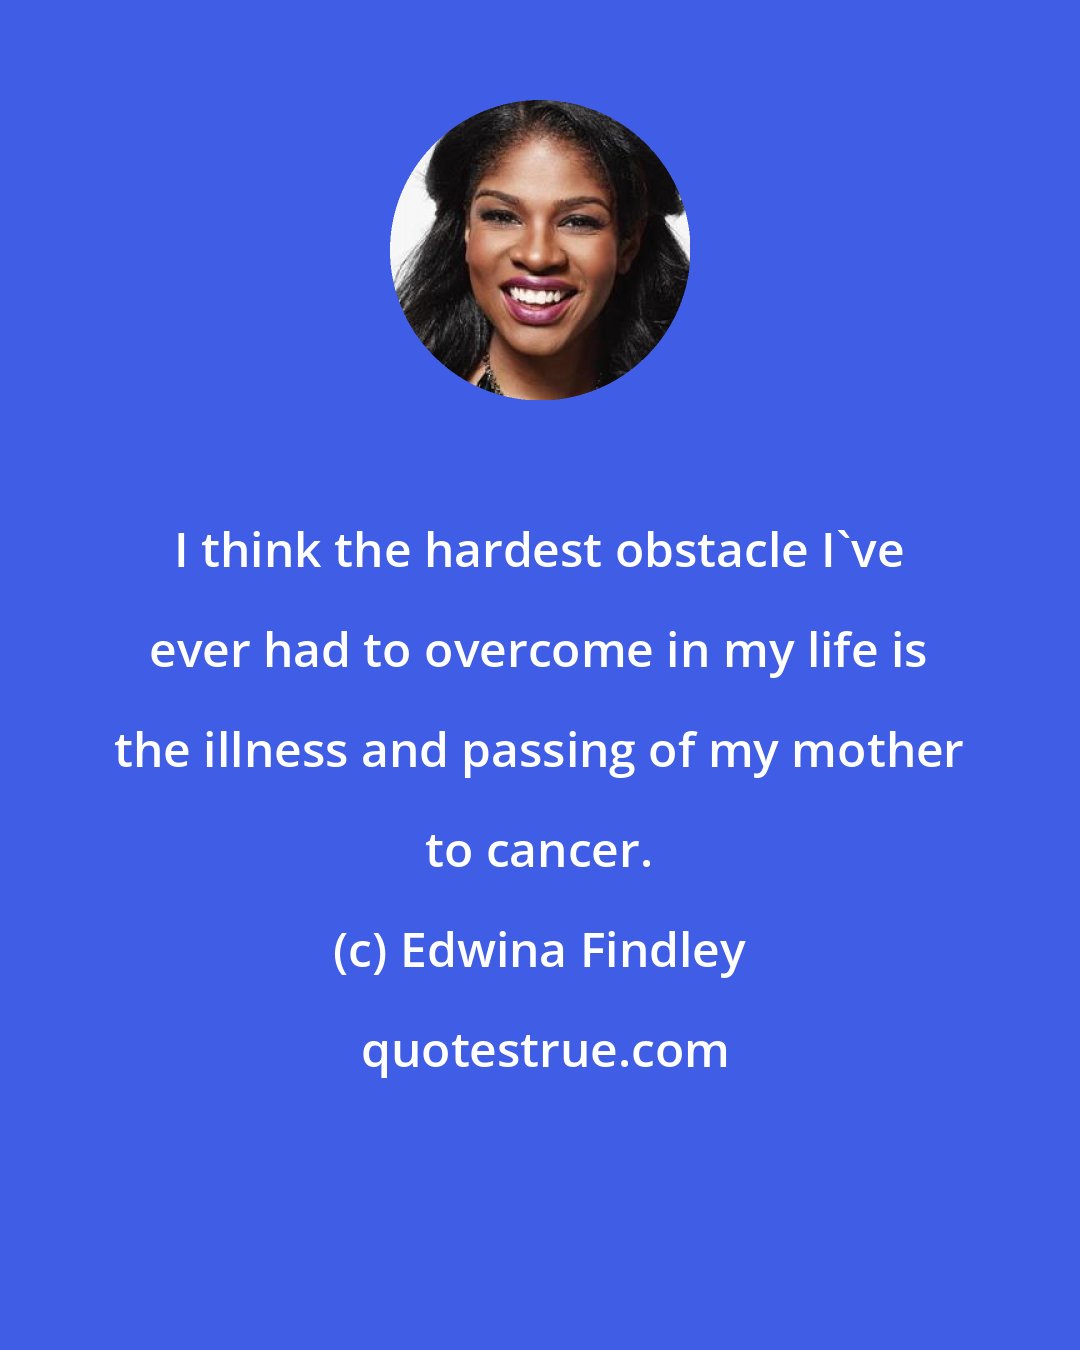 Edwina Findley: I think the hardest obstacle I've ever had to overcome in my life is the illness and passing of my mother to cancer.